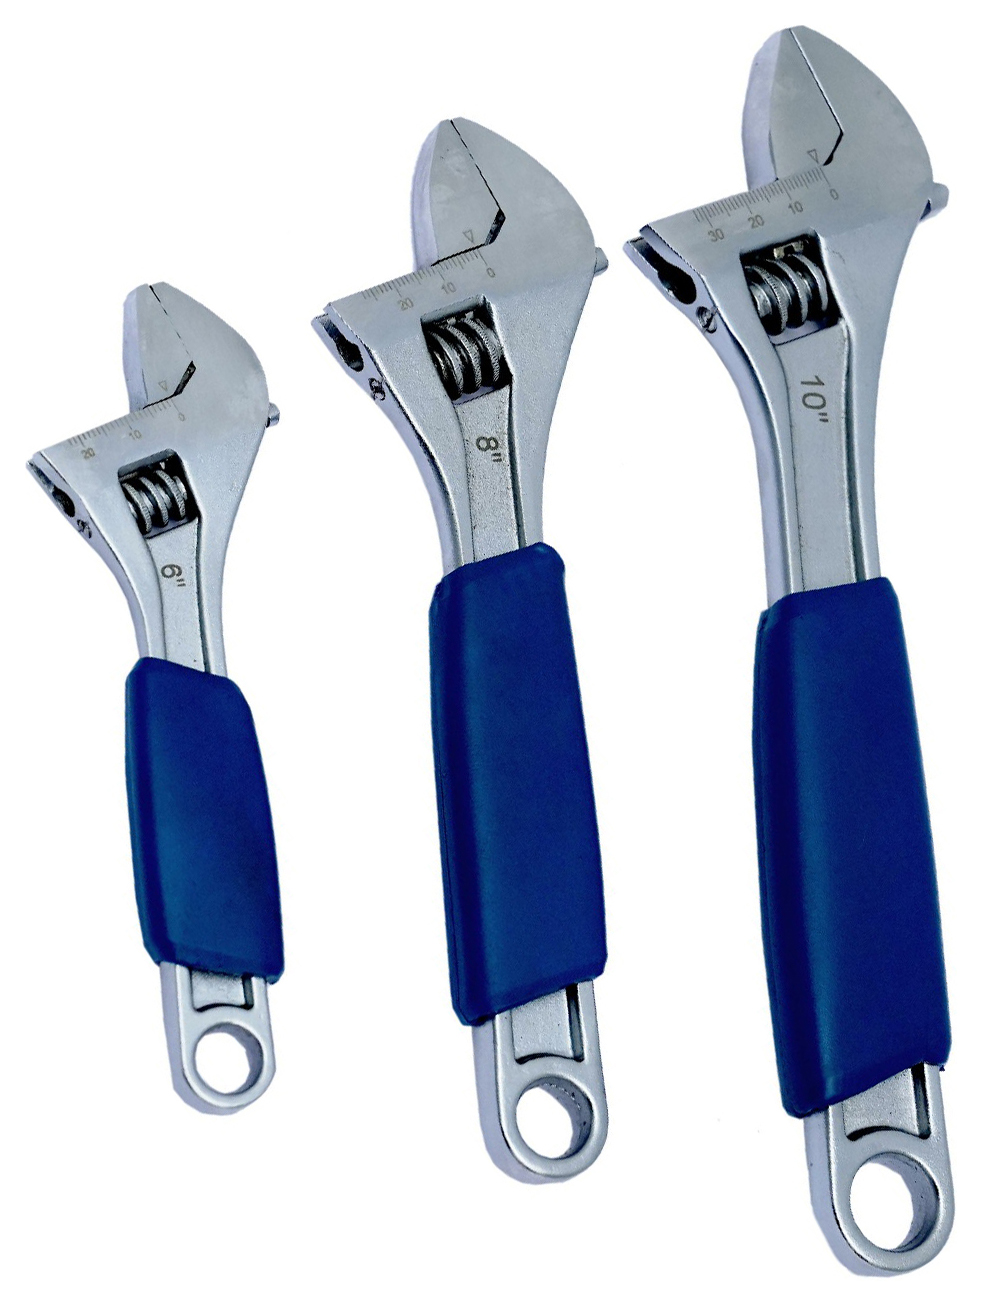 Wickes Adjustable Drop Forged Steel 3 Piece Wrench Set with Grips